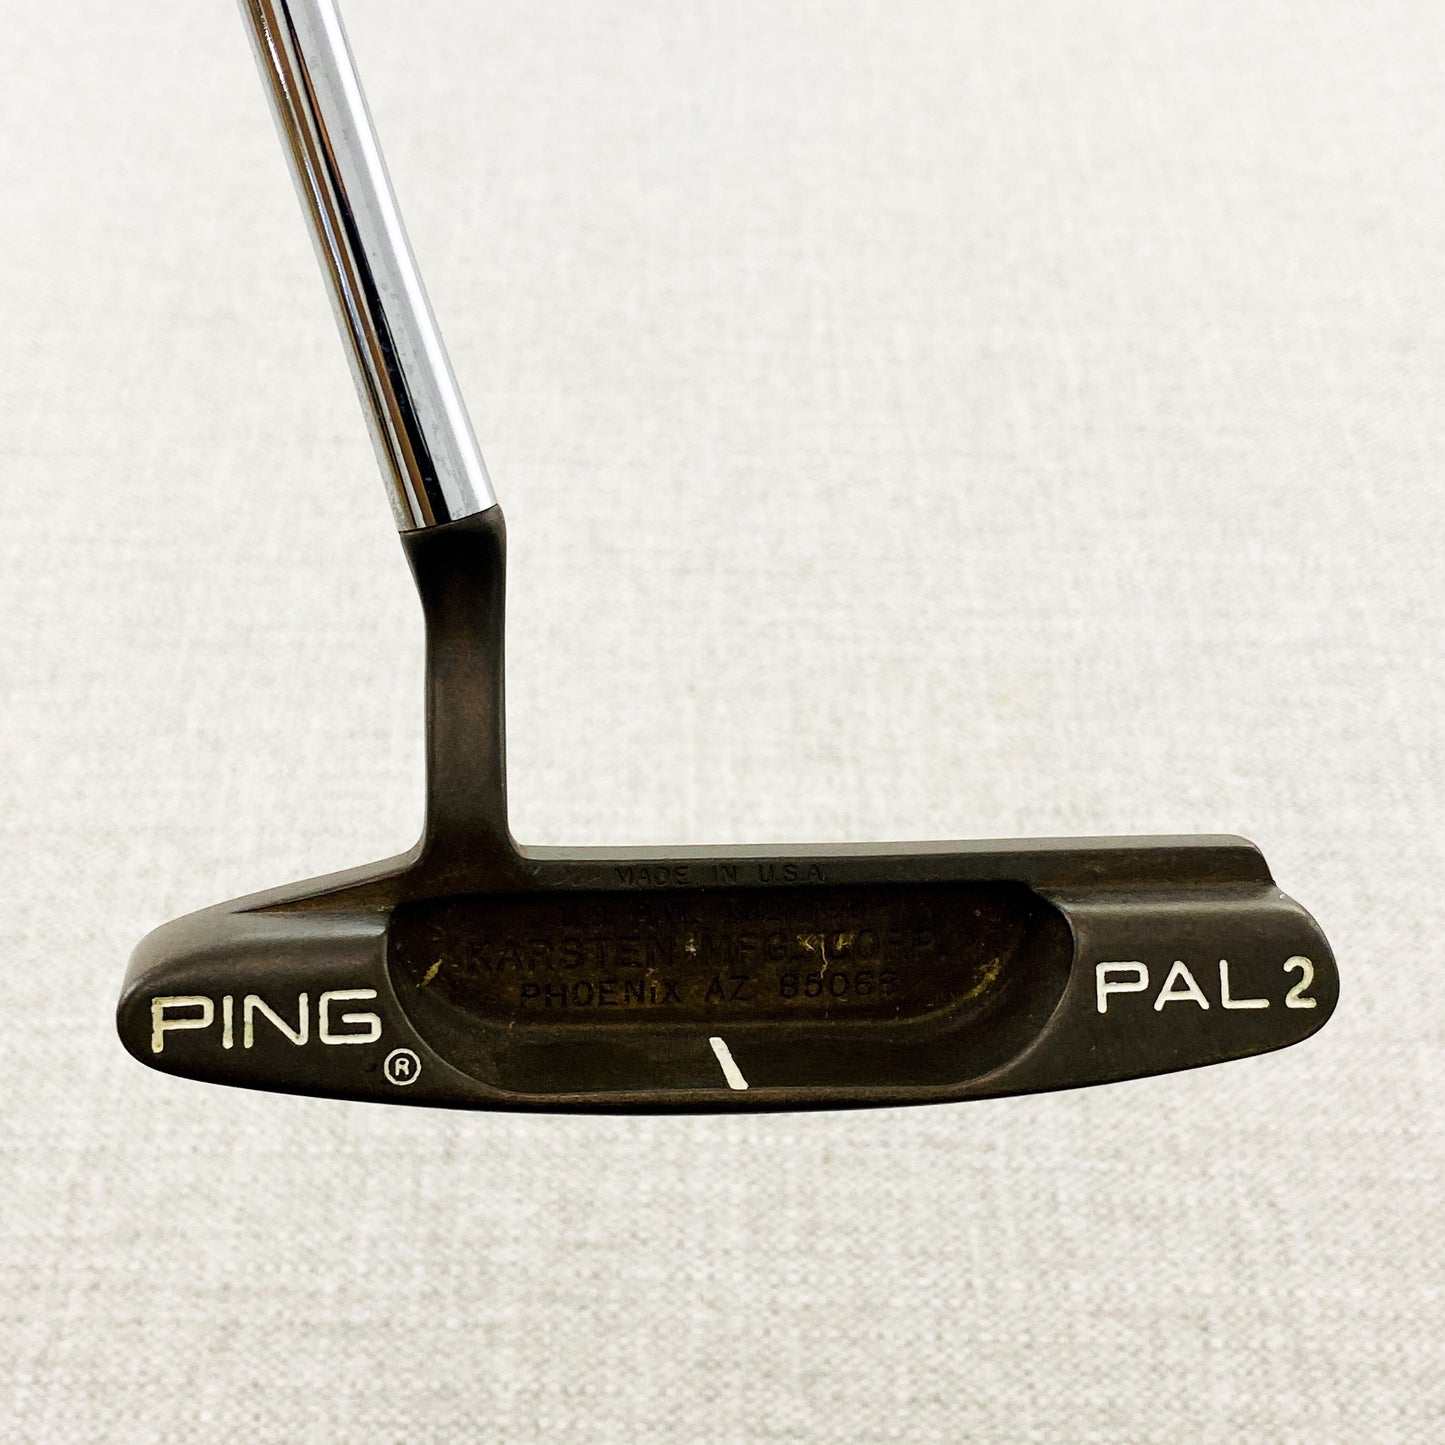 PING Pal 2 Beryllium Copper Putter. 34 inch - Very Good Condition # 11060